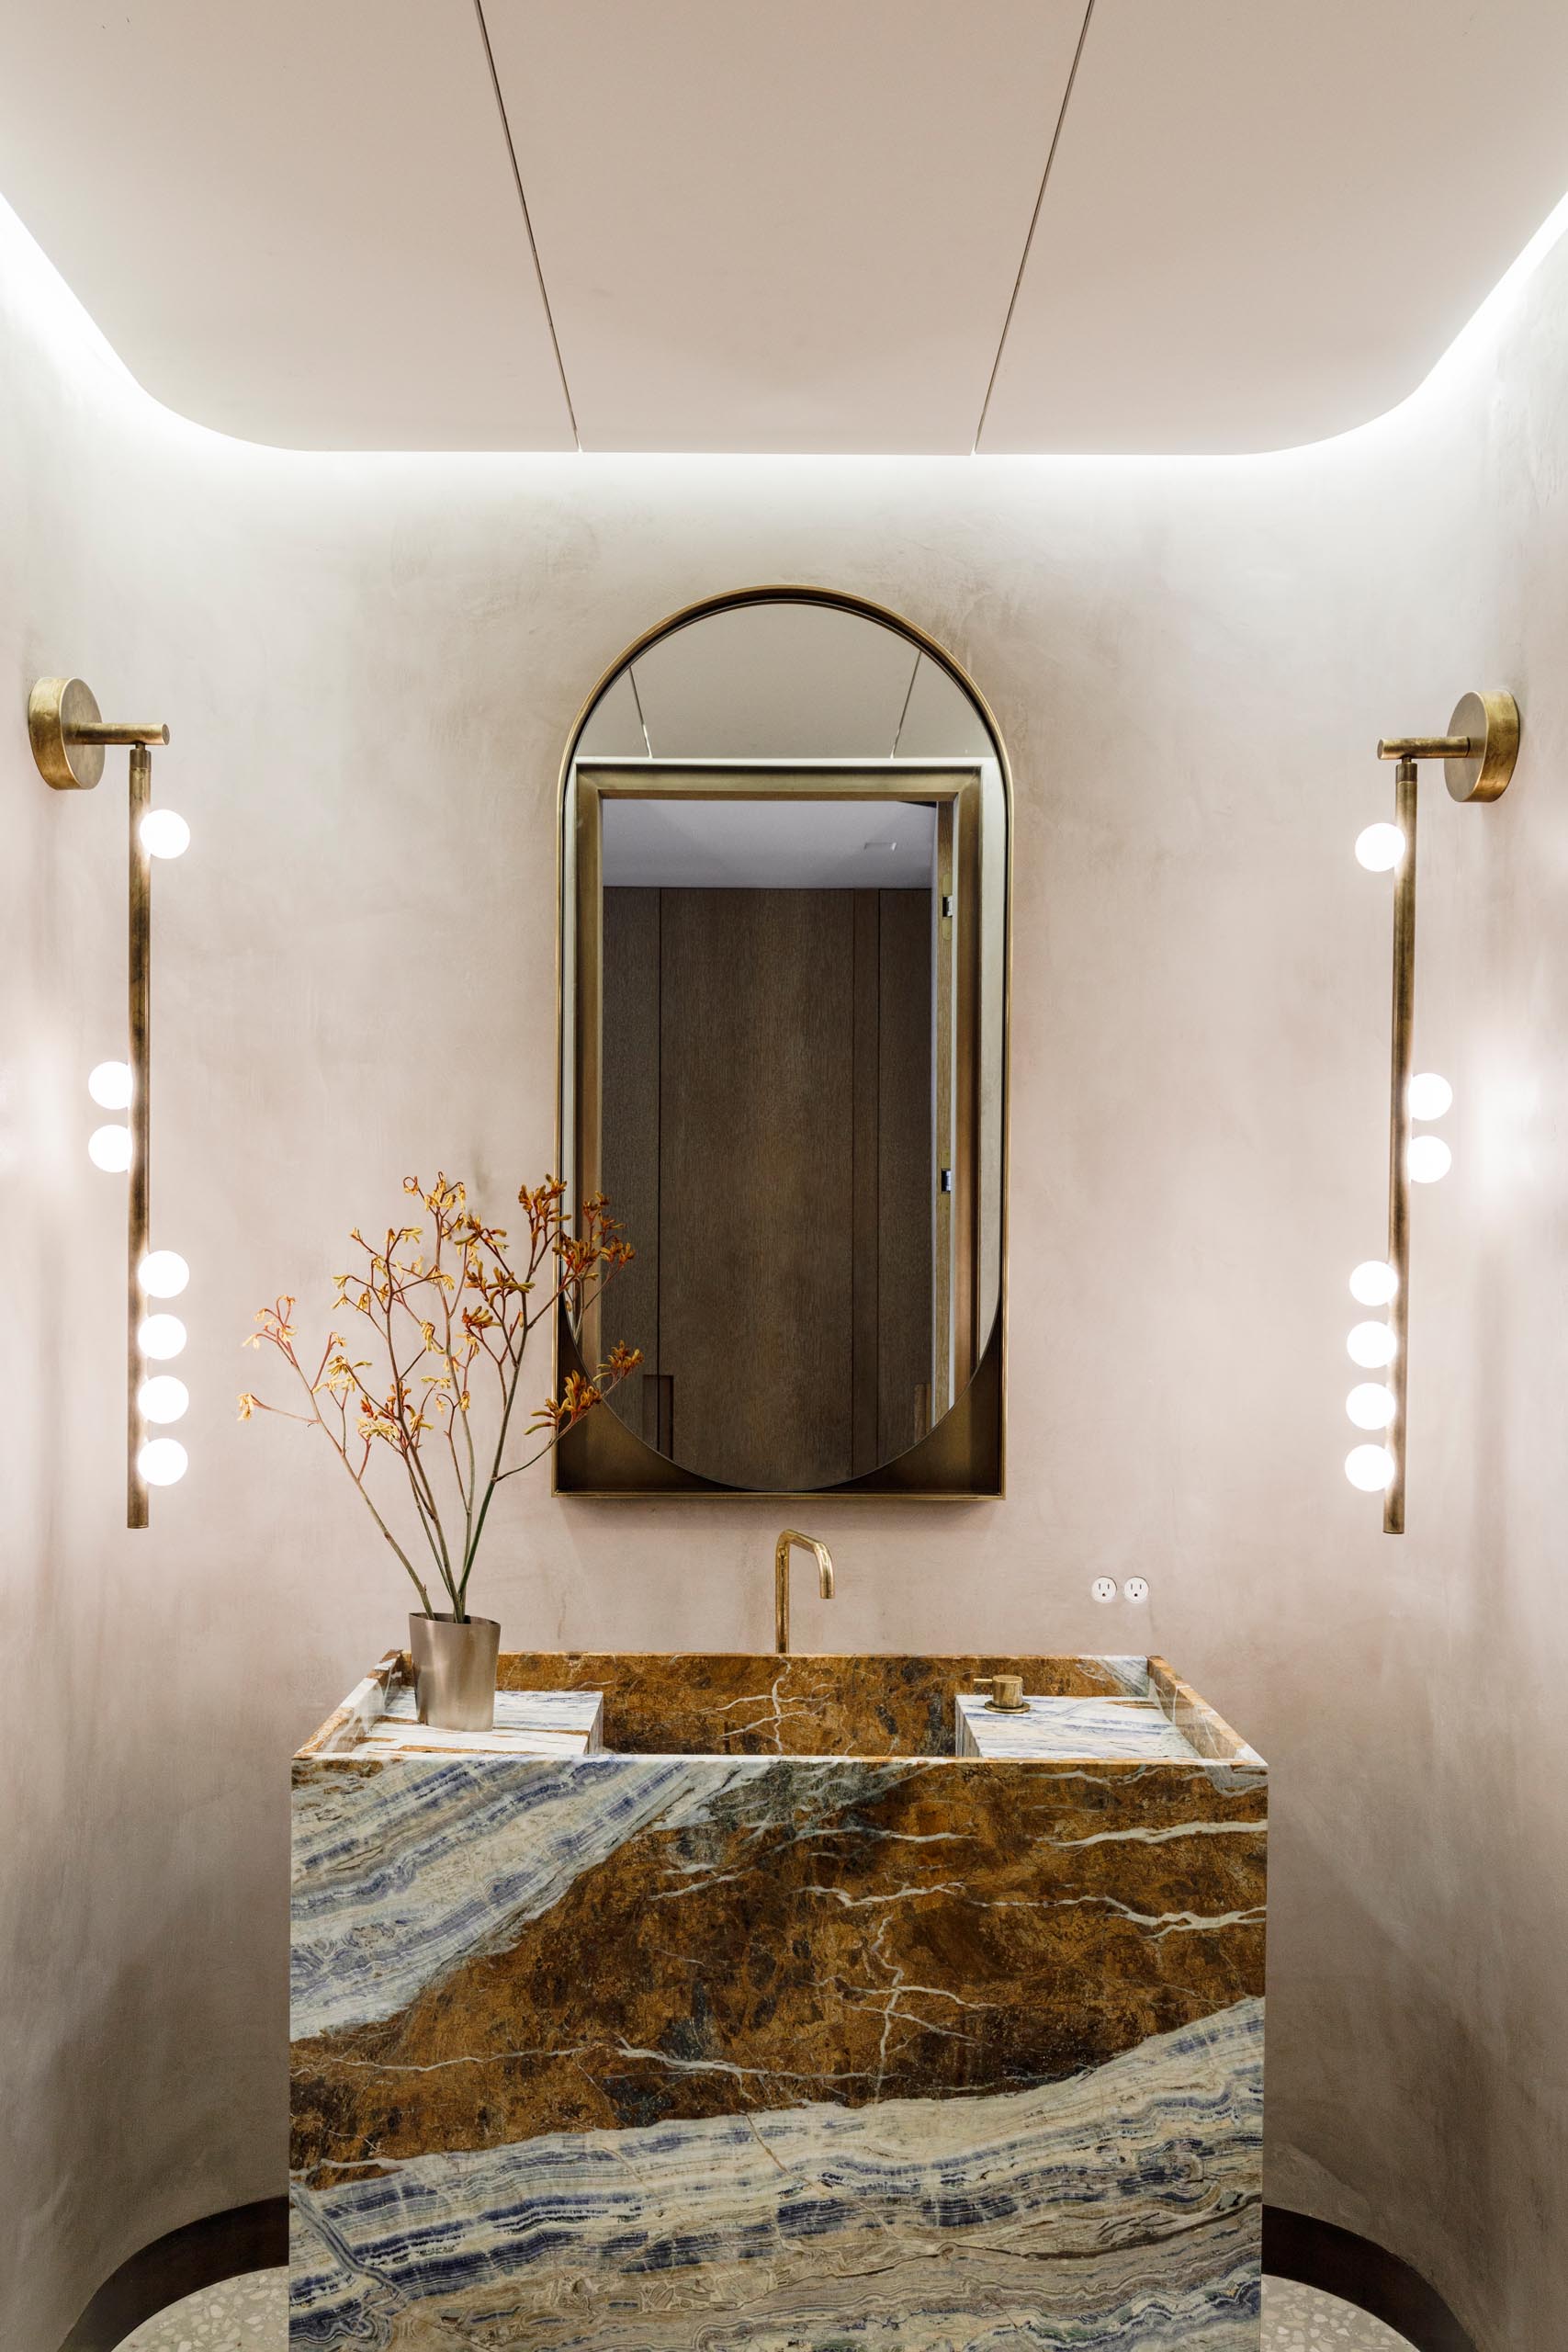 This powder room includes a stone vanity in figural Cassiopeia marble, curved venetian plaster walls with LED cove lighting, sconces by Lindsey Adelman, a custom bronze mirror by Kin and Company, and a faucet by Vola.